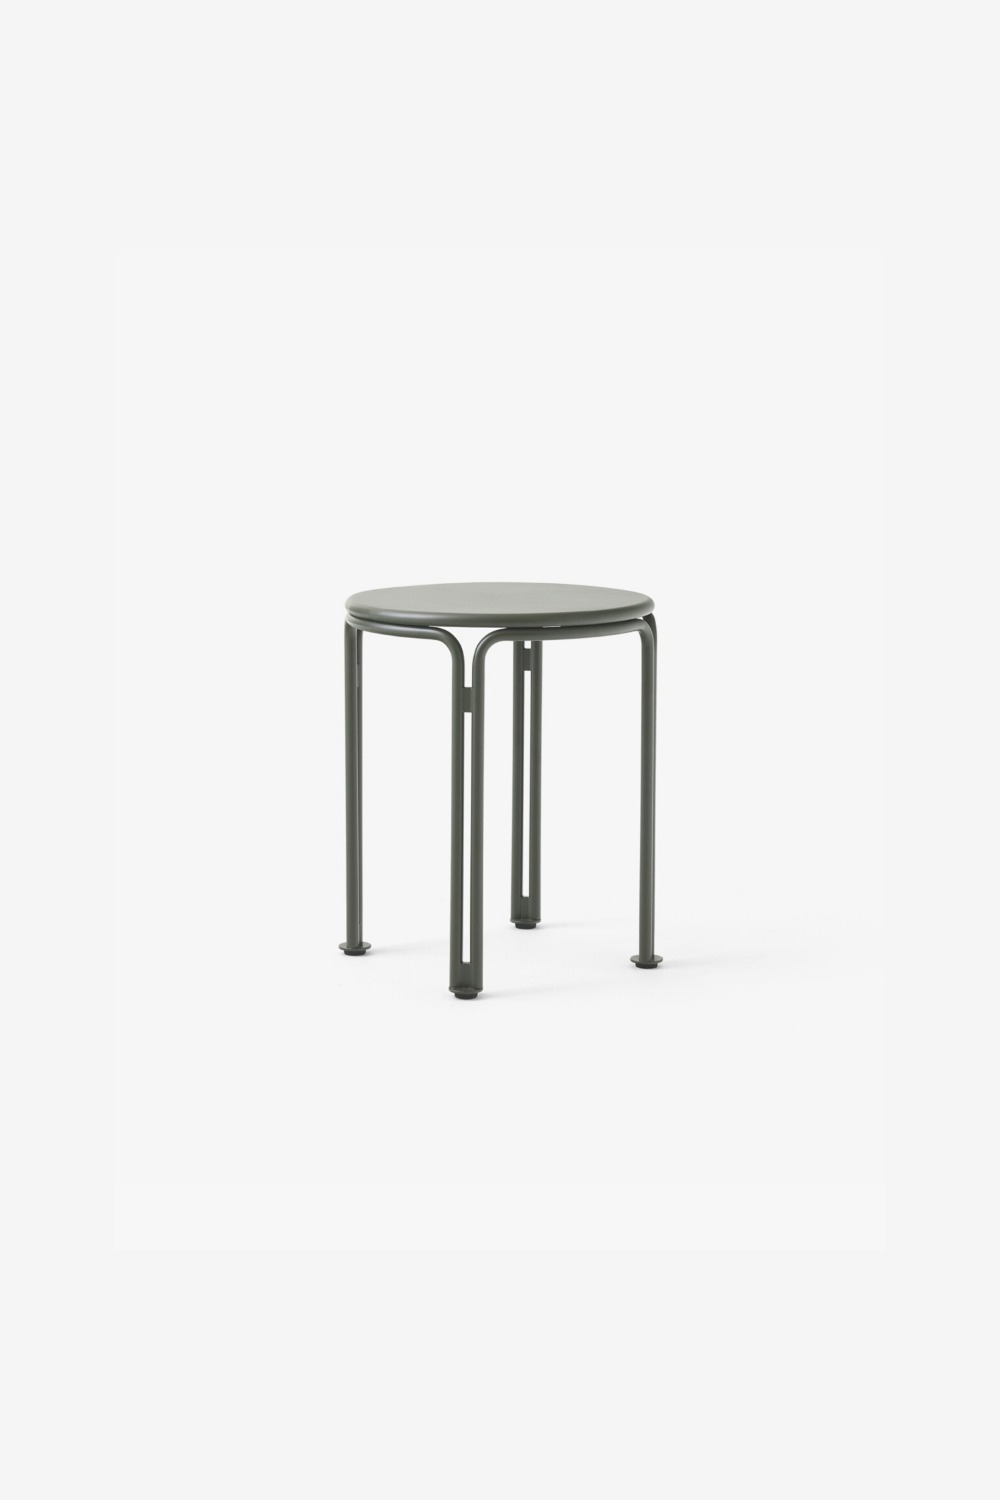 [&amp;Tradition] Thorvald Side Table /SC102 (Bronze Green)